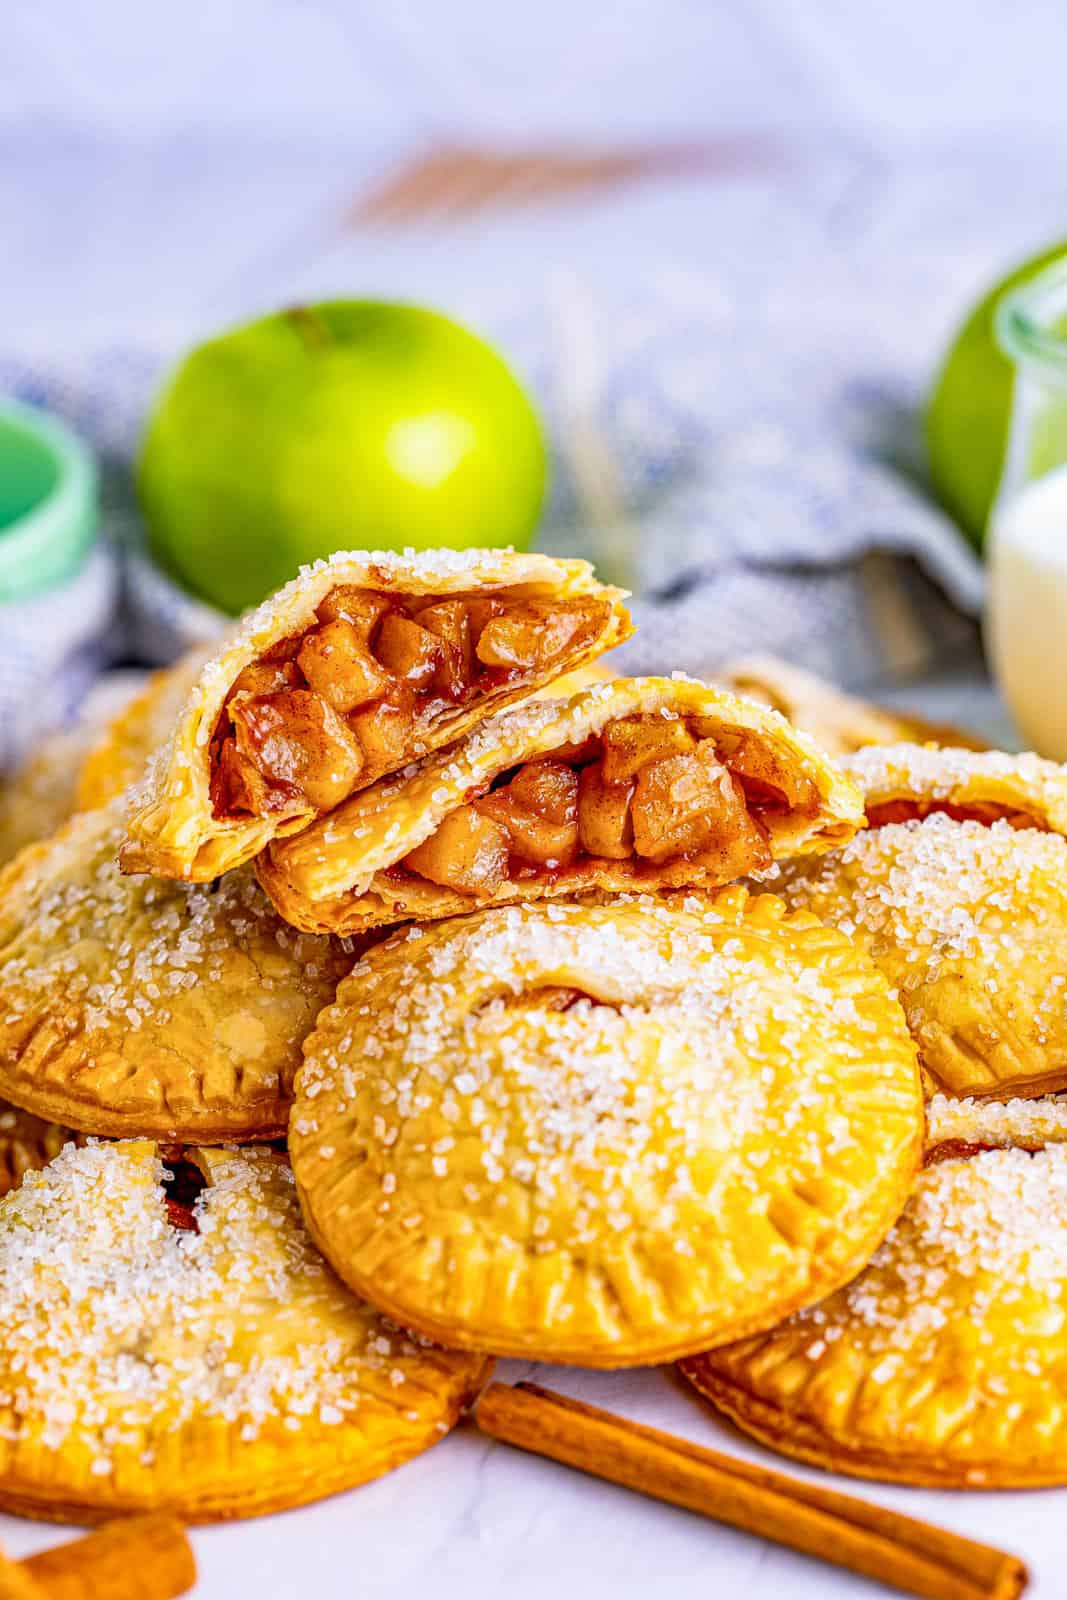 Stacked Apple Hand Pies with top one cut in half showing inside.